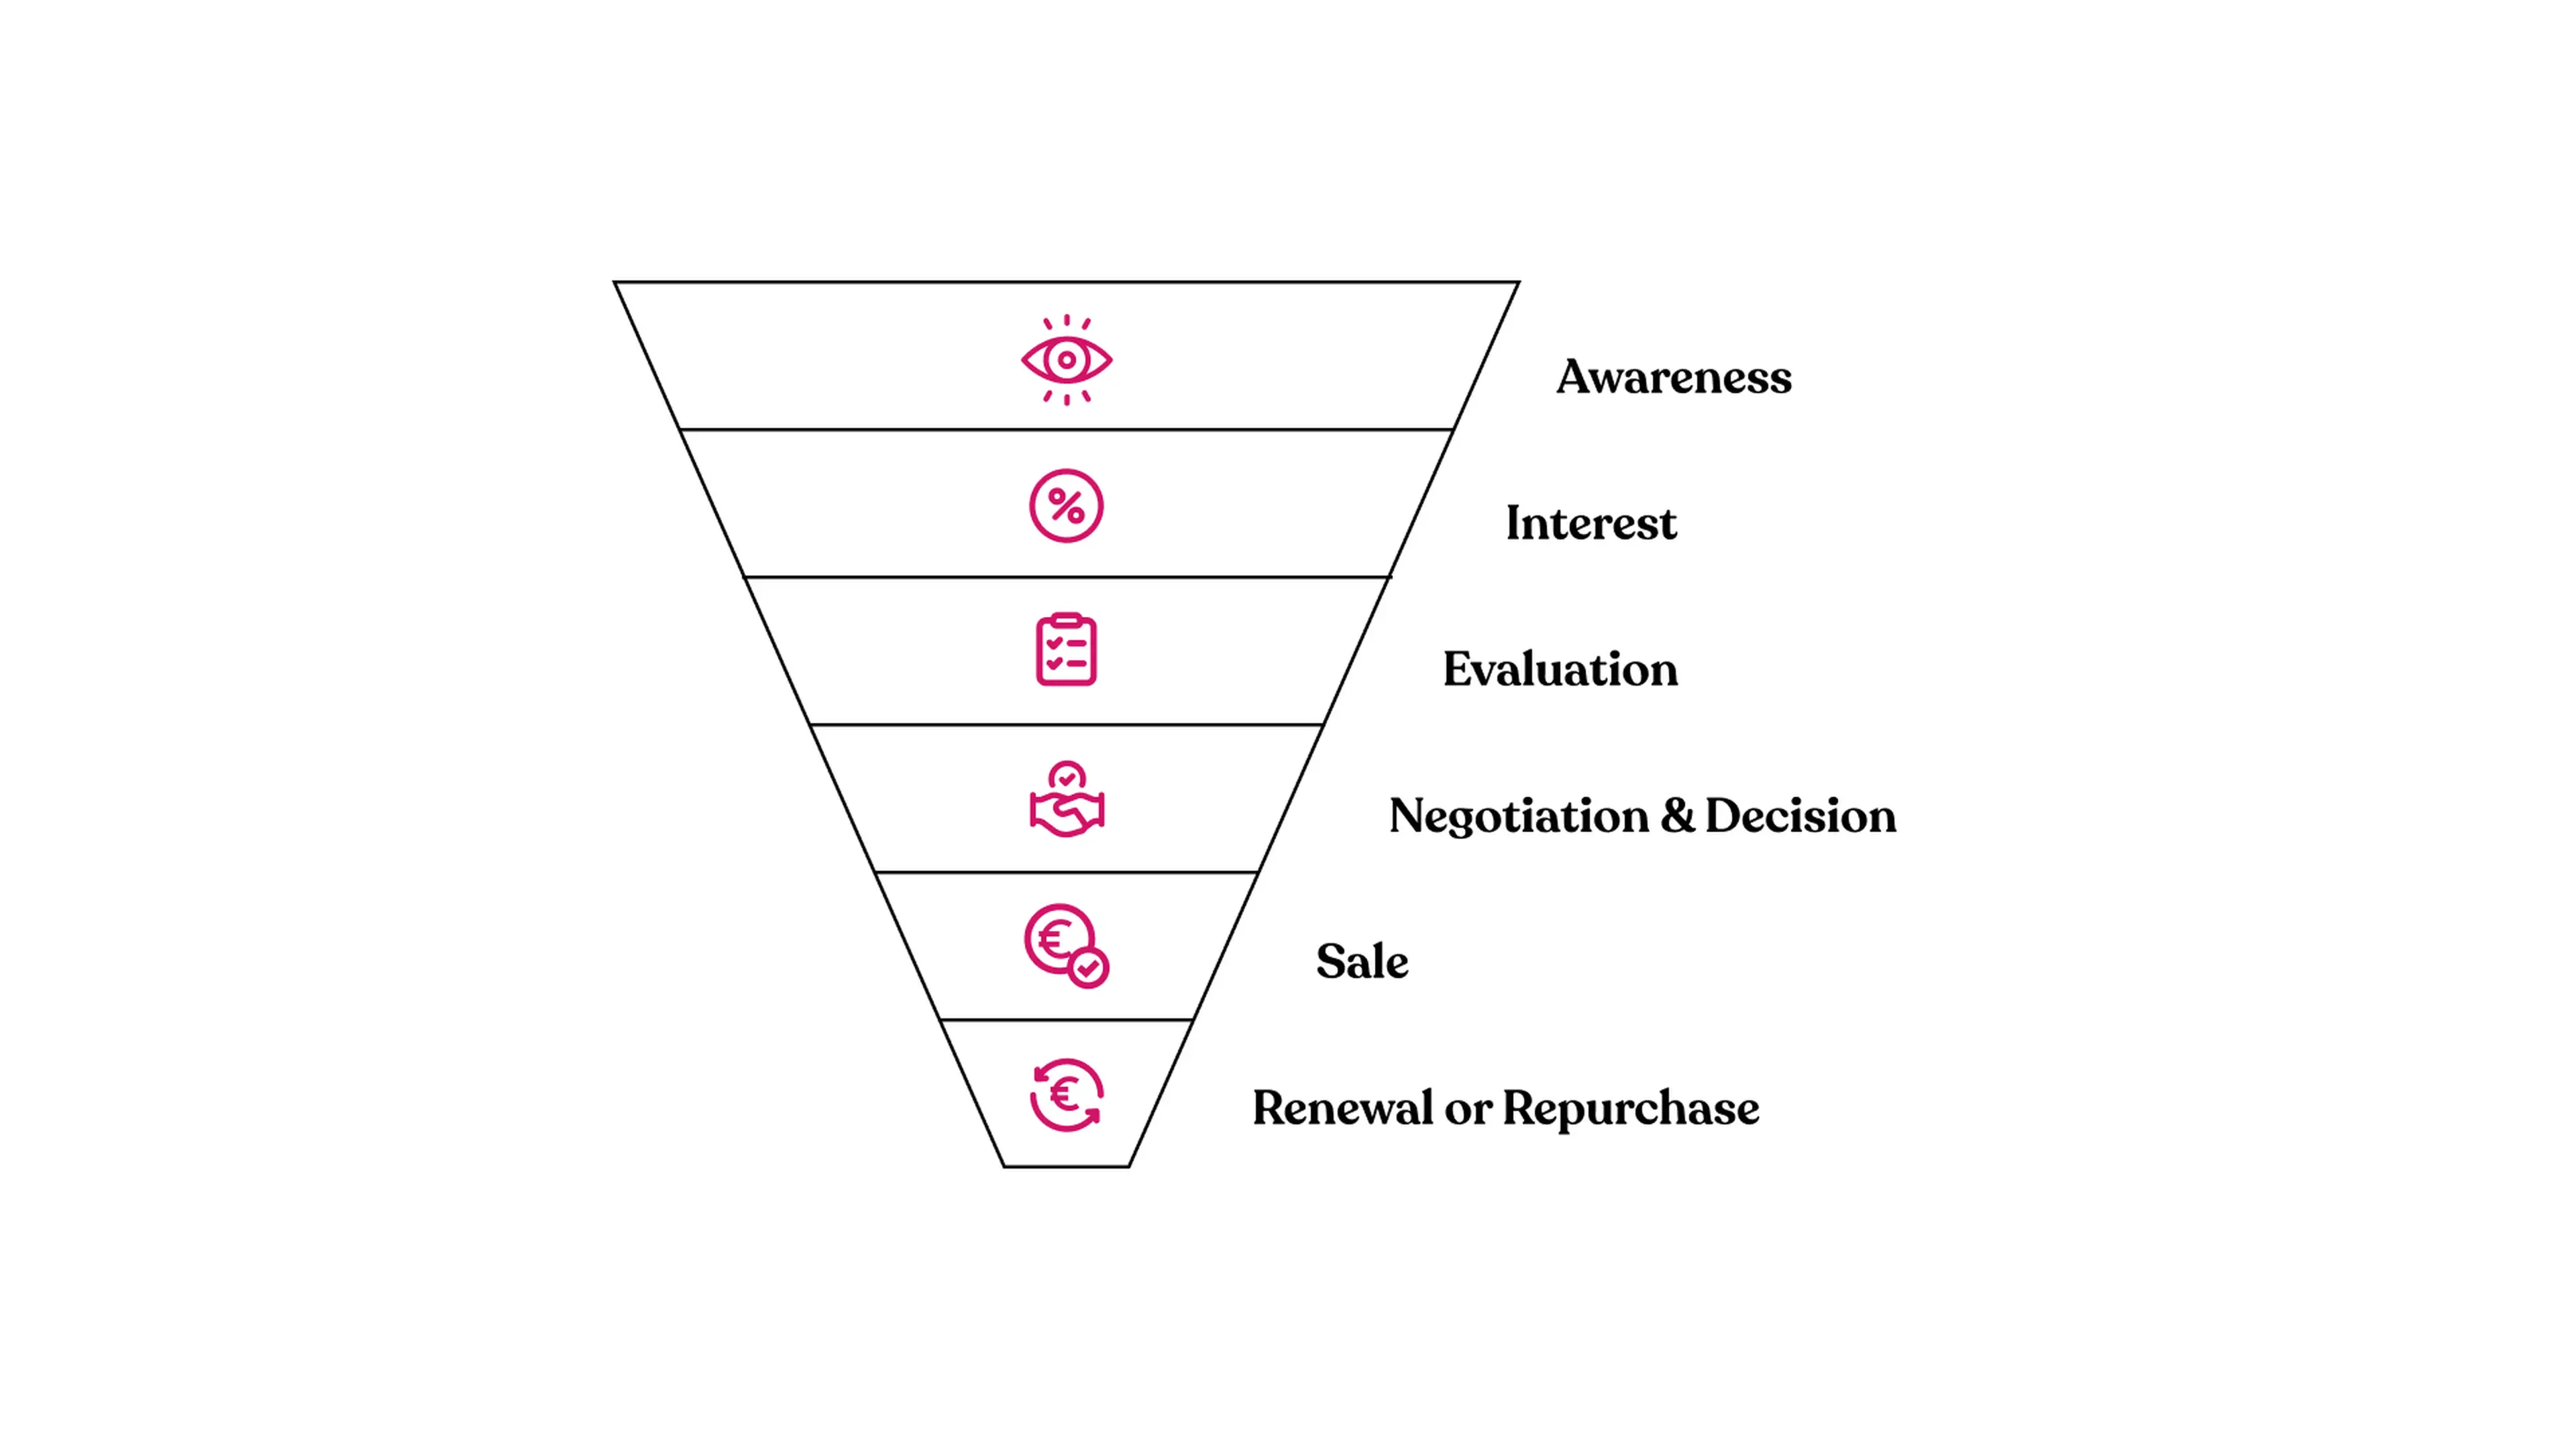 A sales funnel with the various stages from awareness to renewal or repurchase 